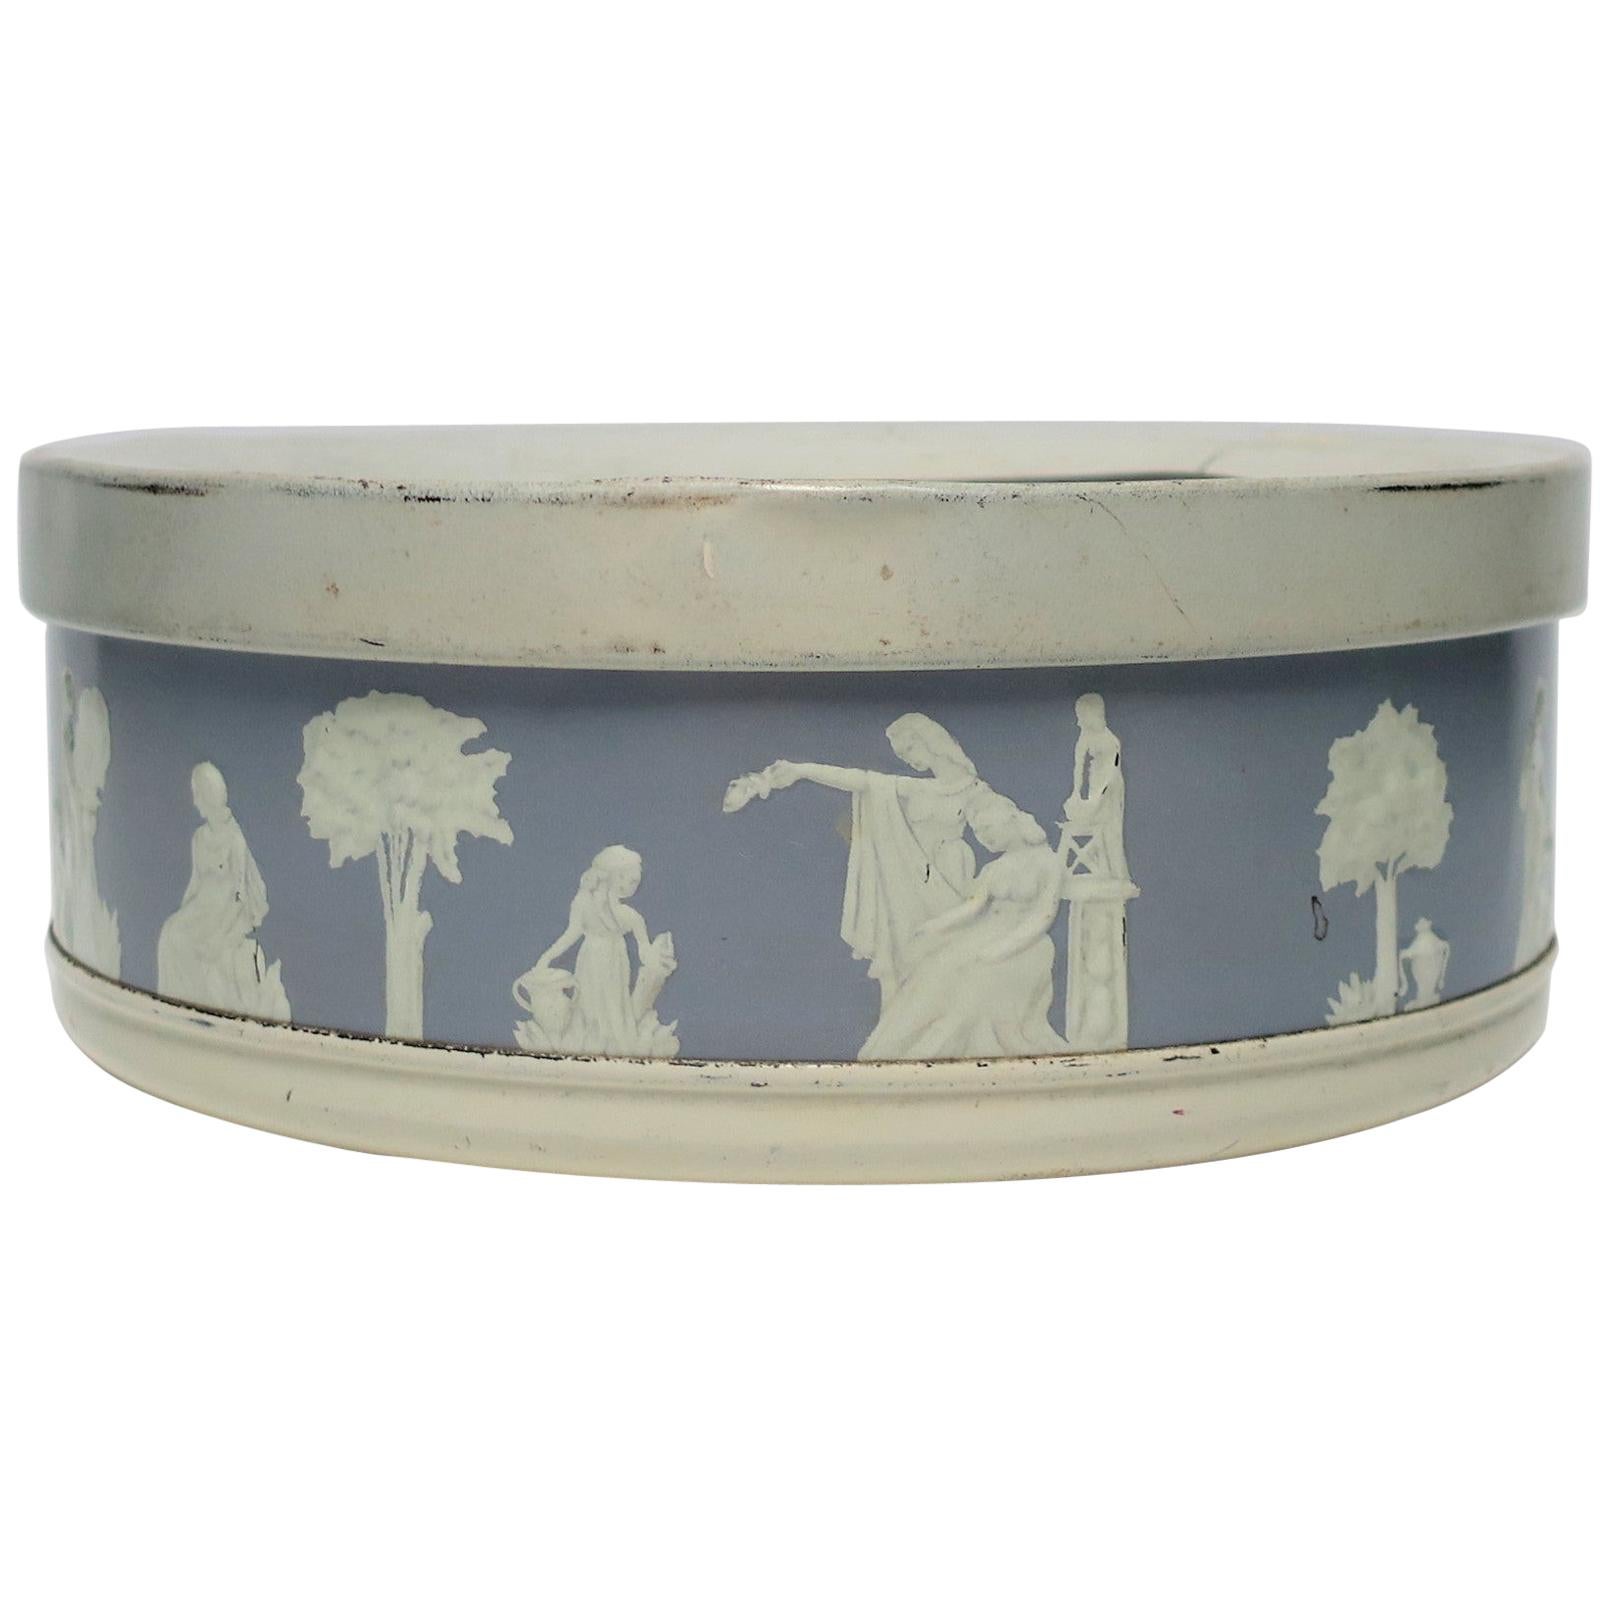 Neoclassical Round Box in the Style of the Wedgwood For Sale